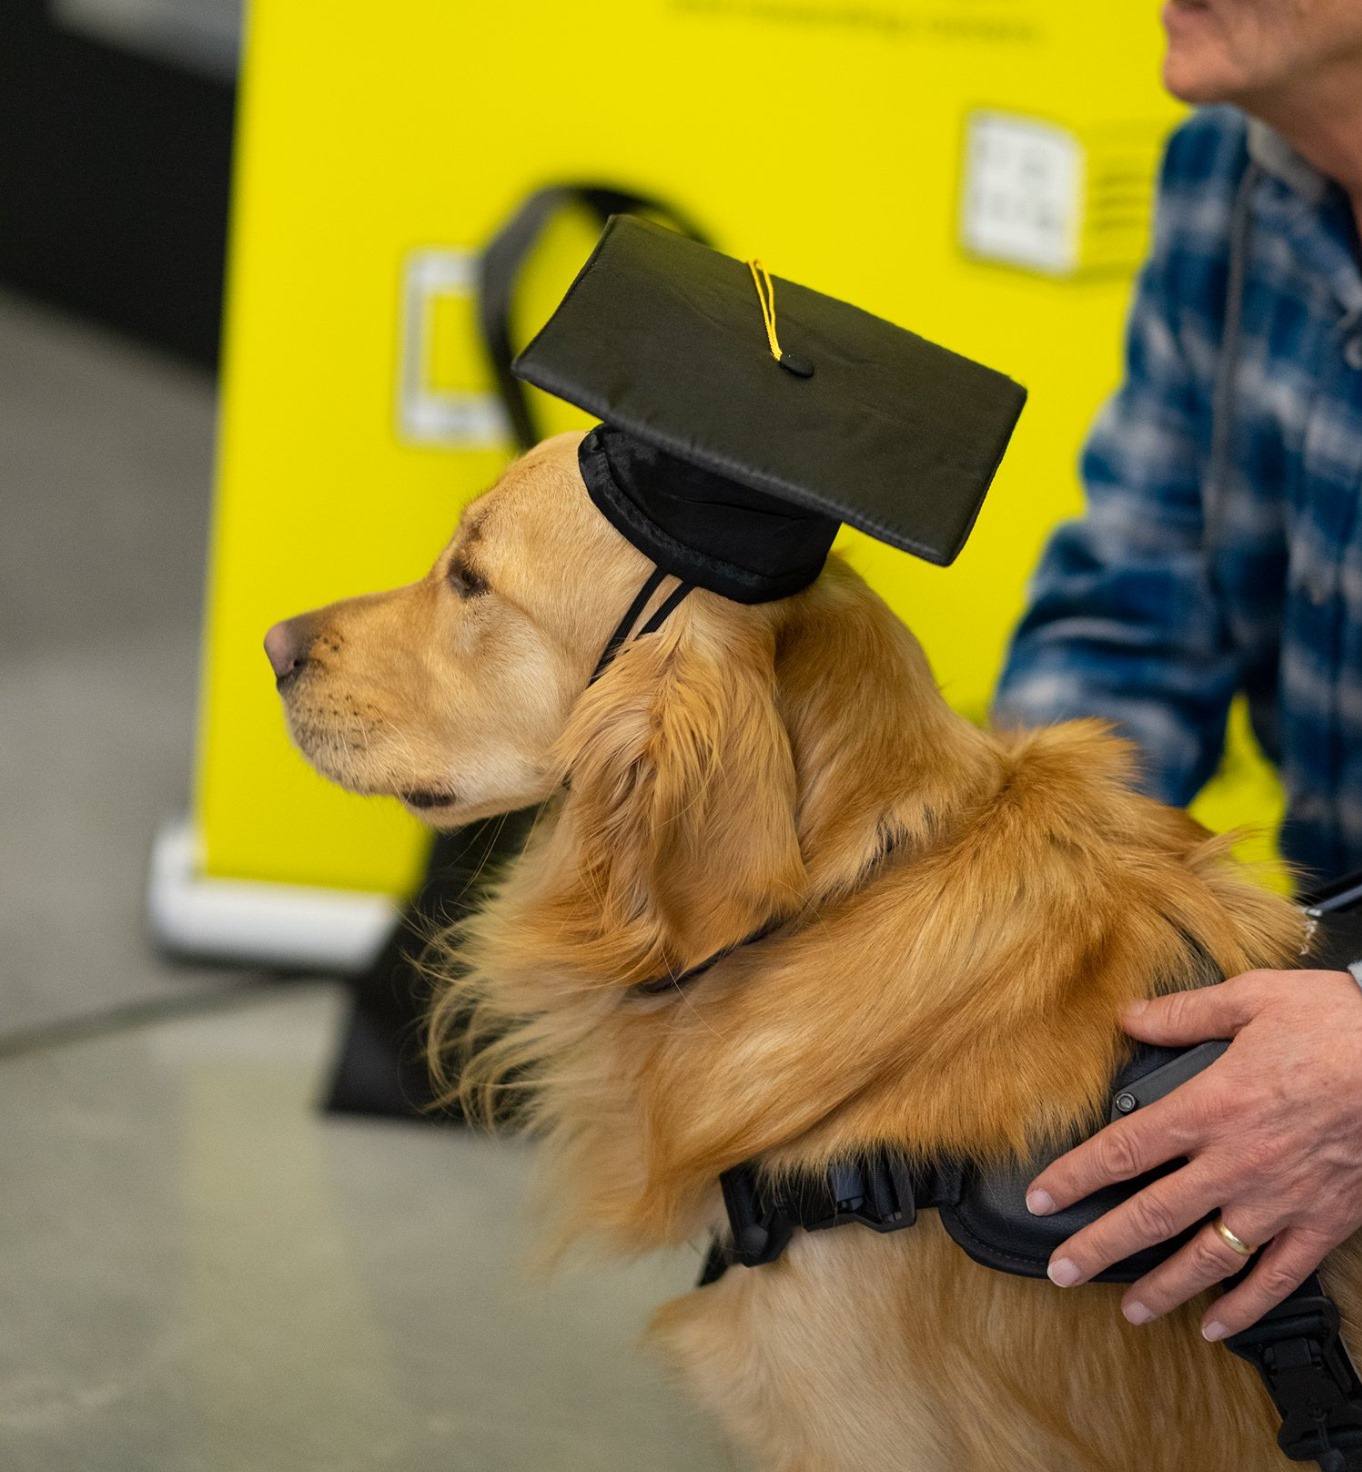 A guide dog and its handler at a graduation ceremony. The handler pets his golden retriever guide dog. The dog is wearing a graduation cap.